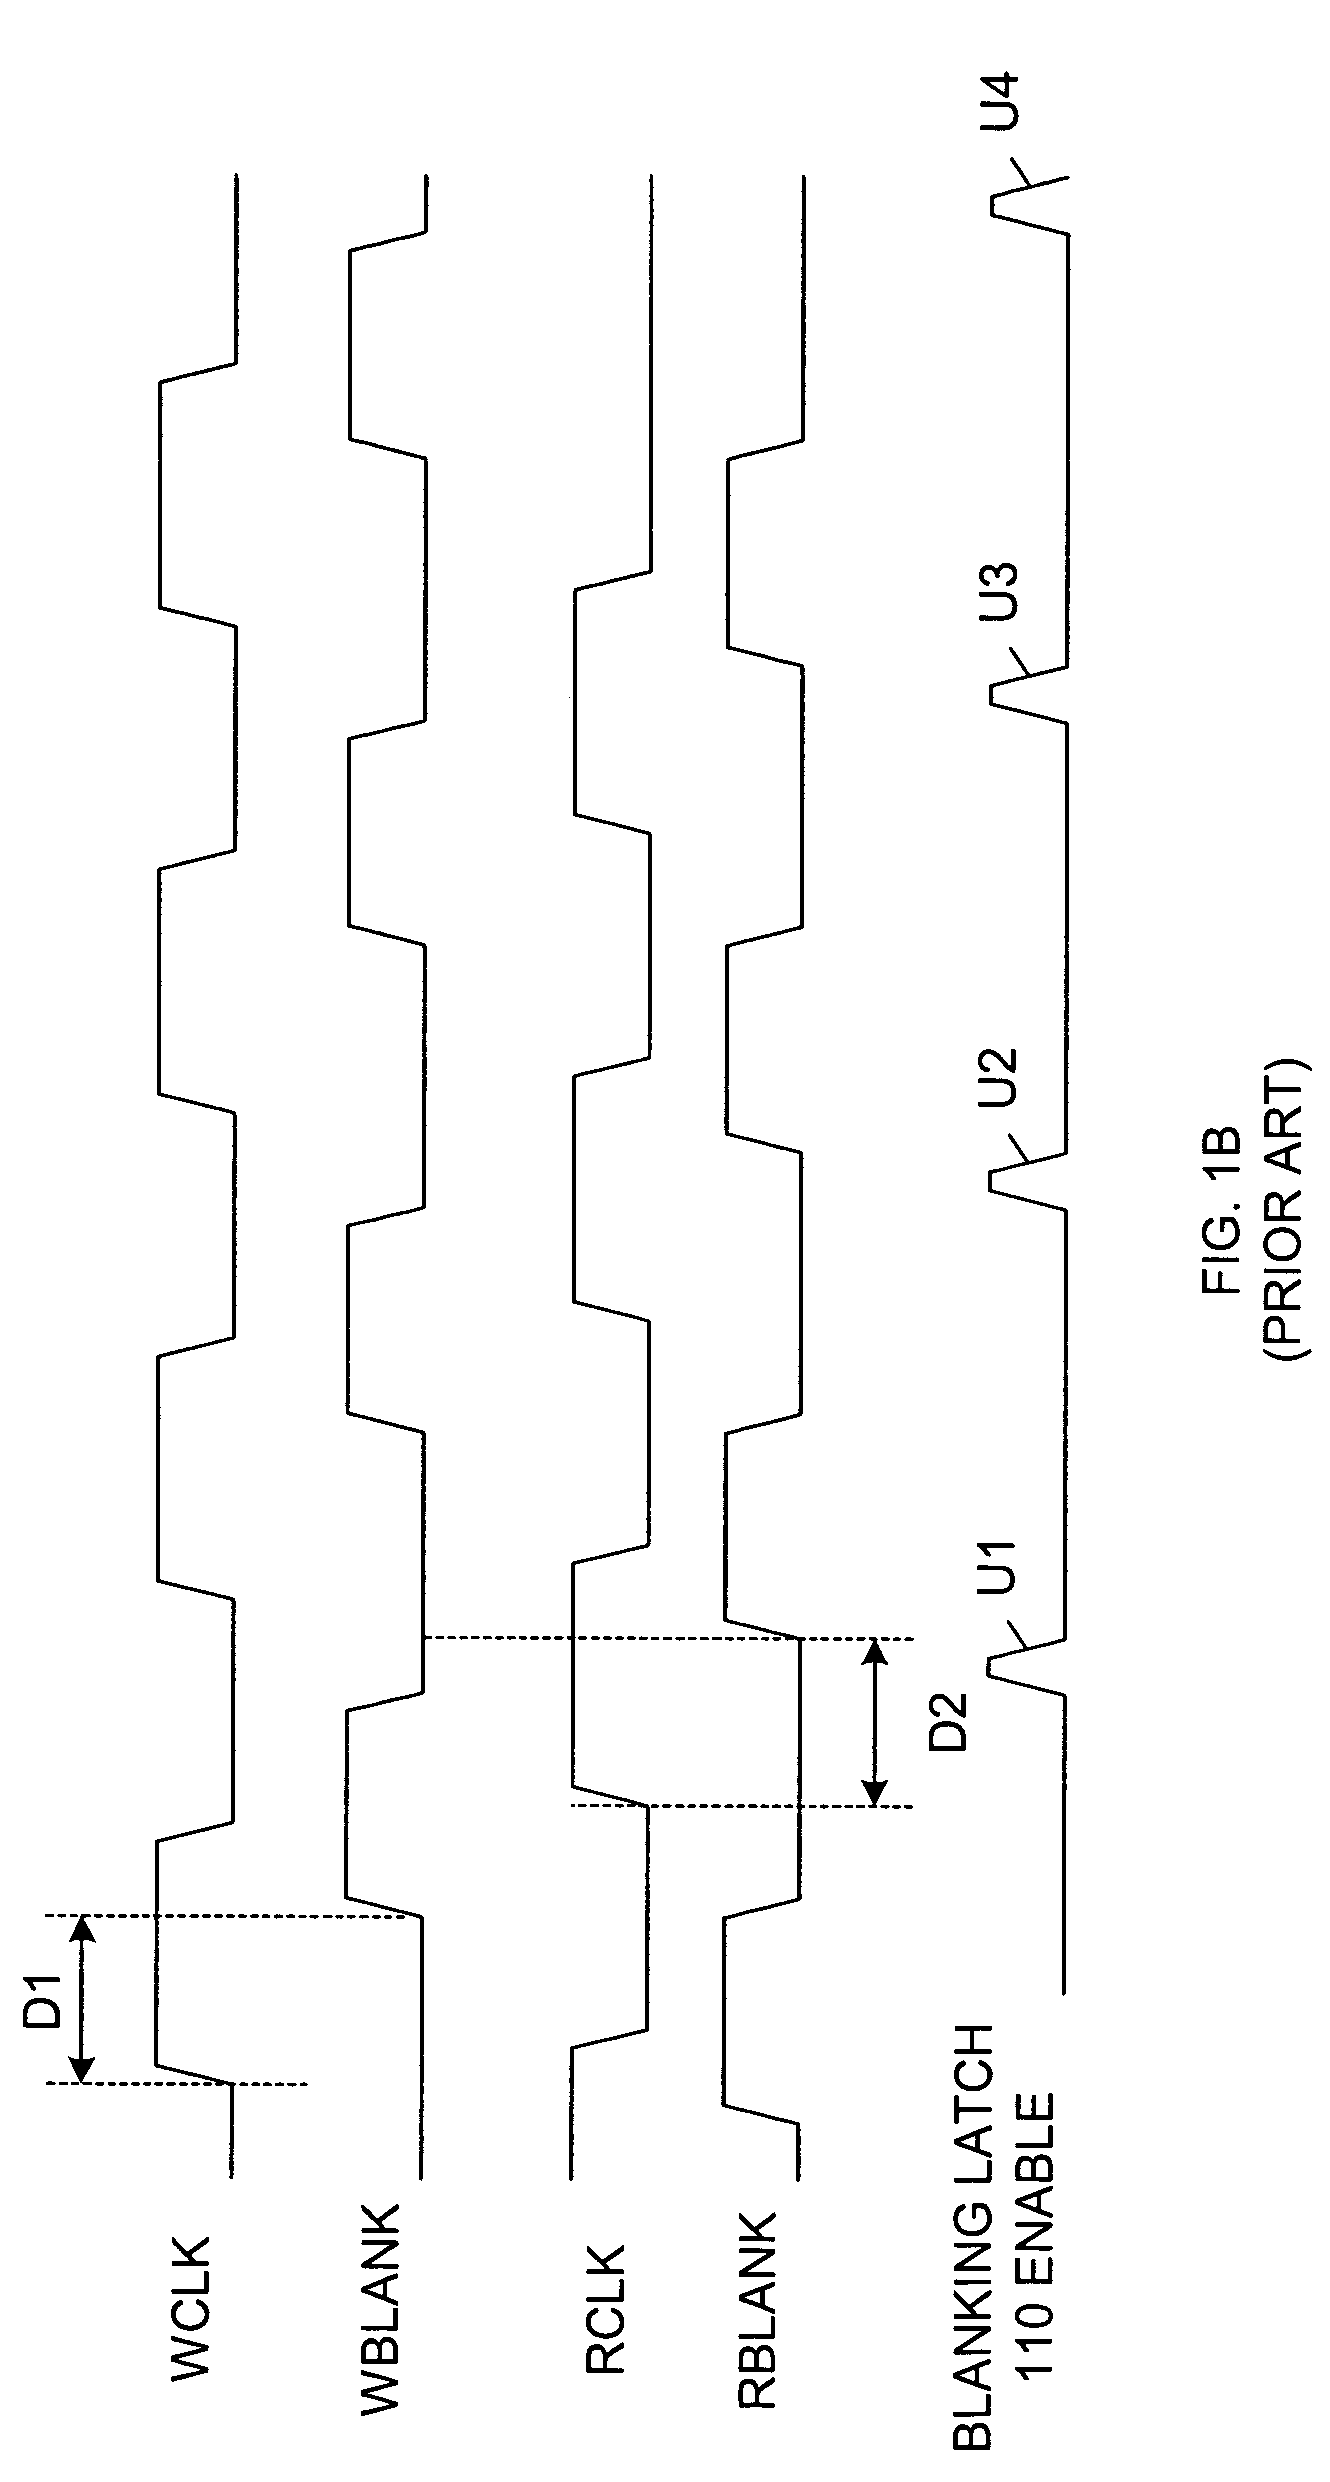 Self-timed multiple blanking for noise suppression during flag generation in a multi-queue first-in first-out memory system